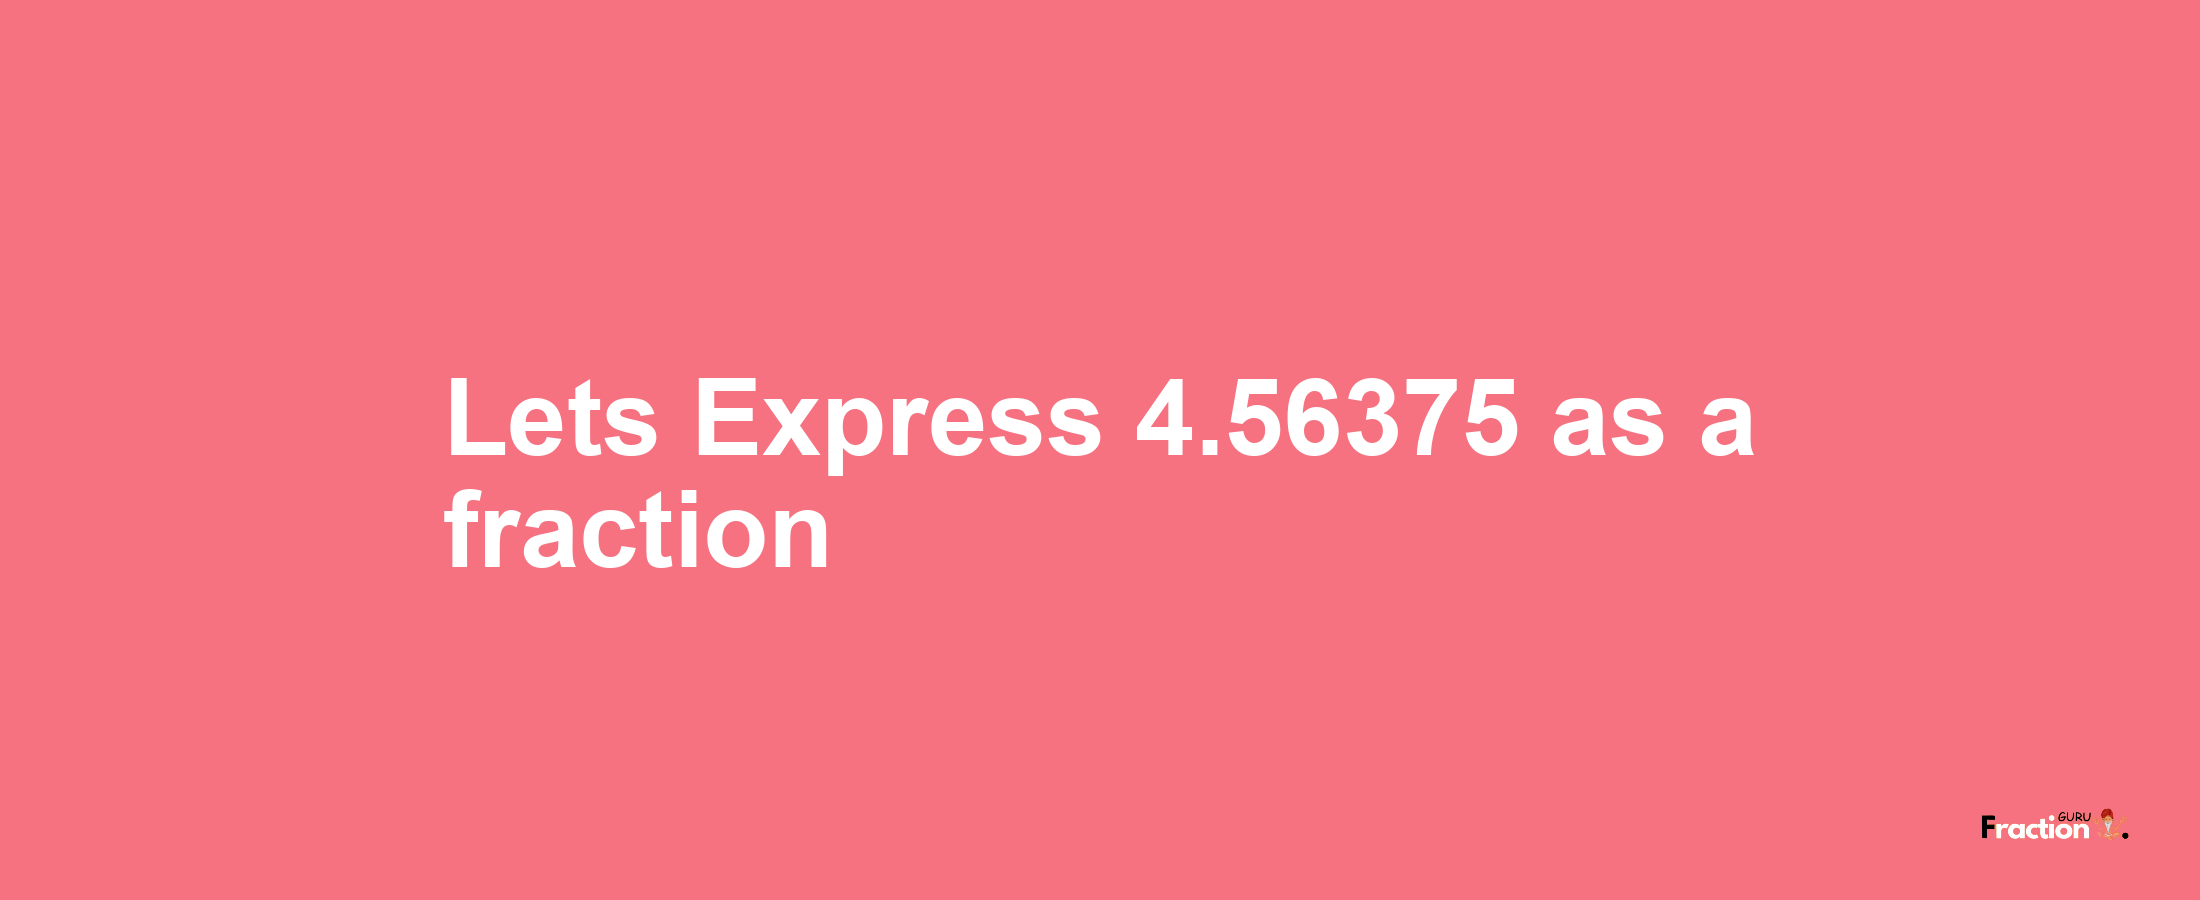 Lets Express 4.56375 as afraction